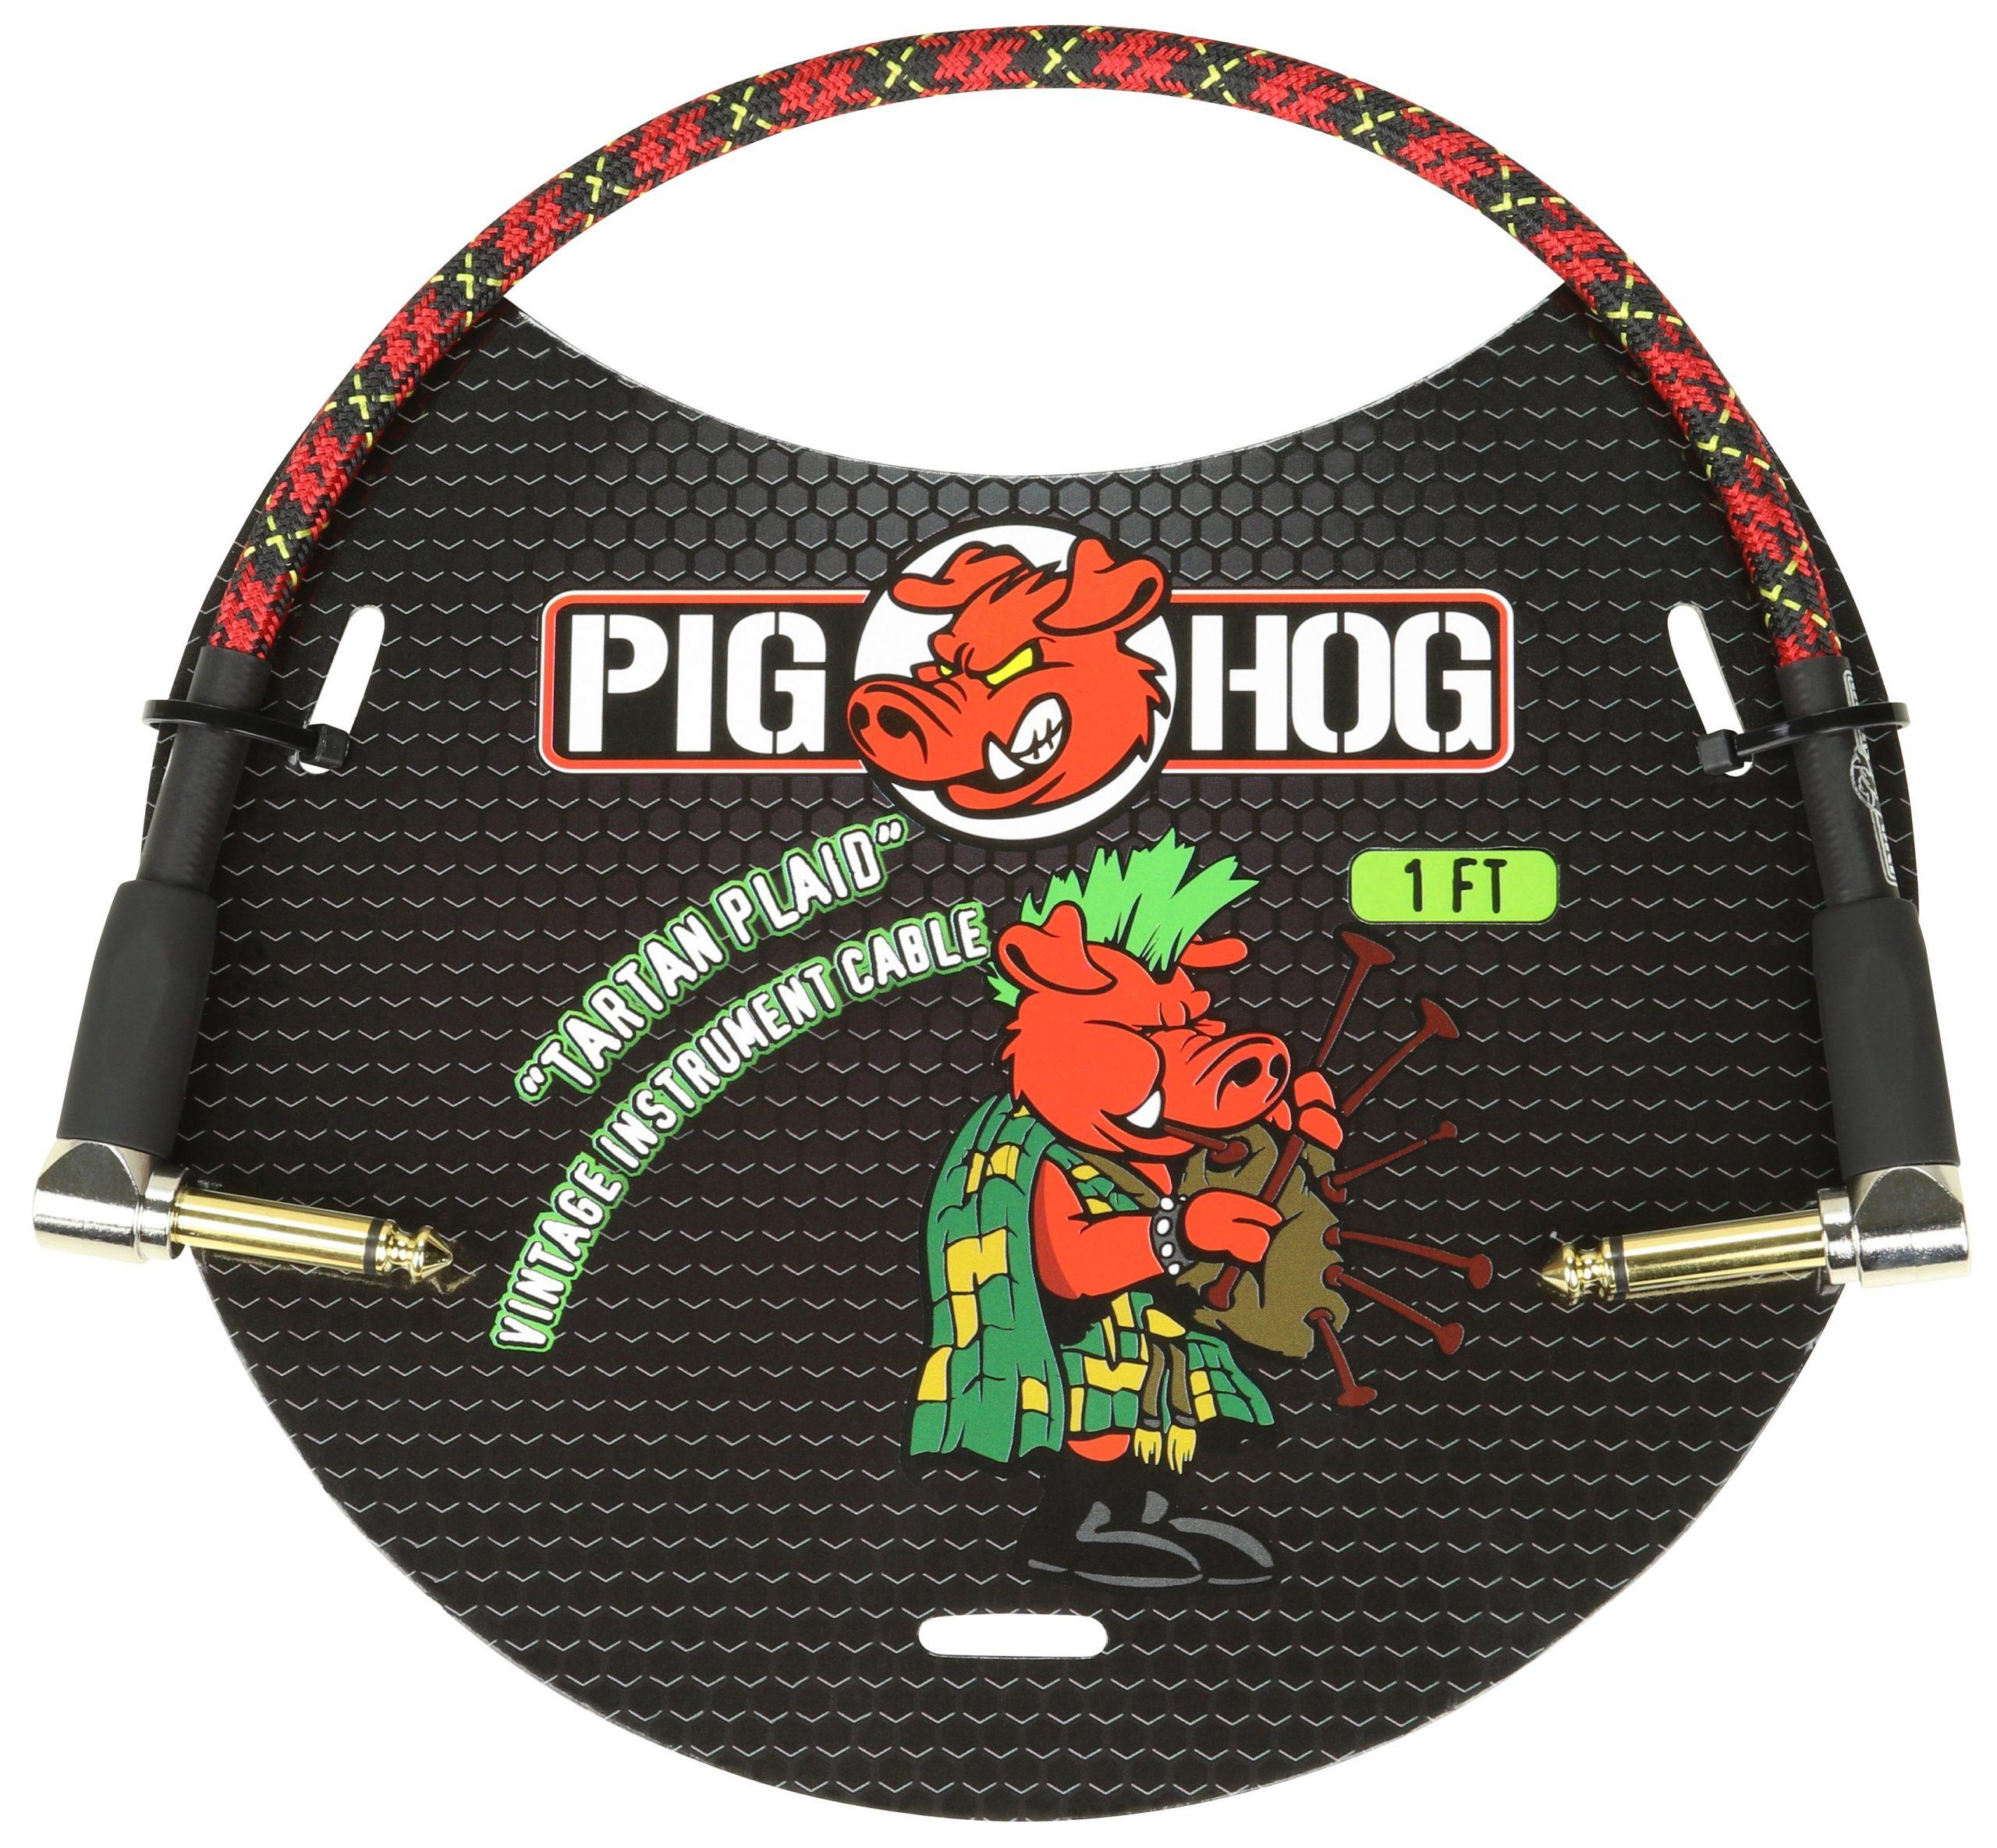 Pig Hog "Tartan Plaid" 1ft Right Angled Patch Cables